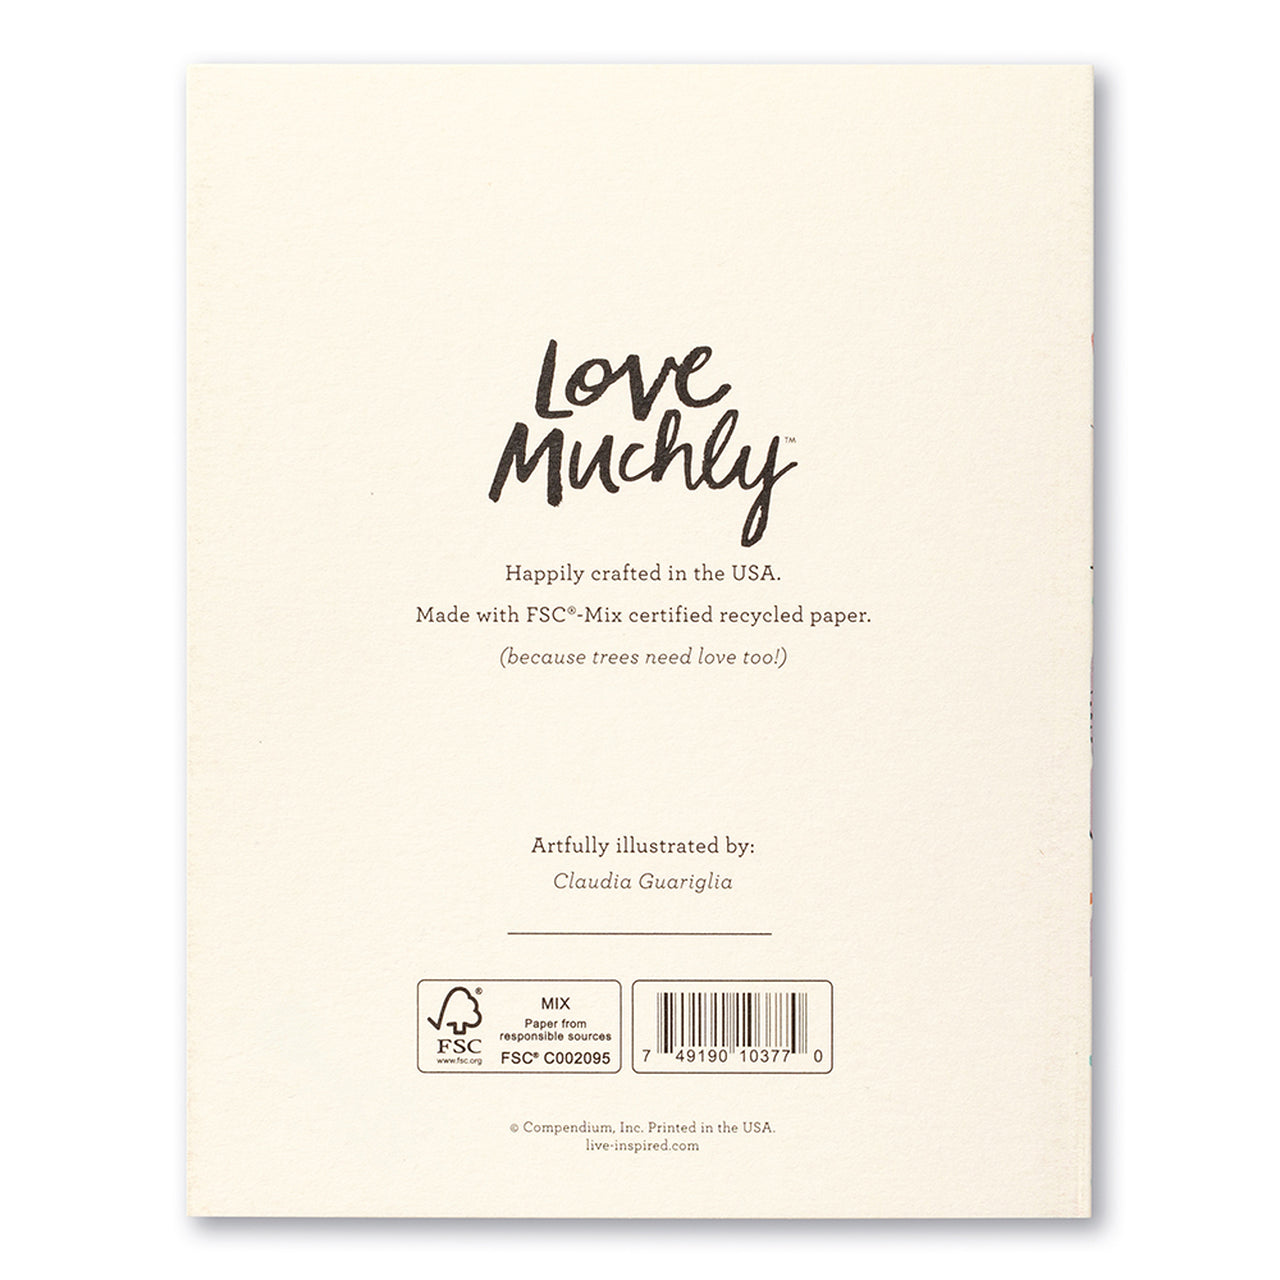 Love Muchly Greeting Card - New Baby - Hello, Tiny Toes - Mellow Monkey